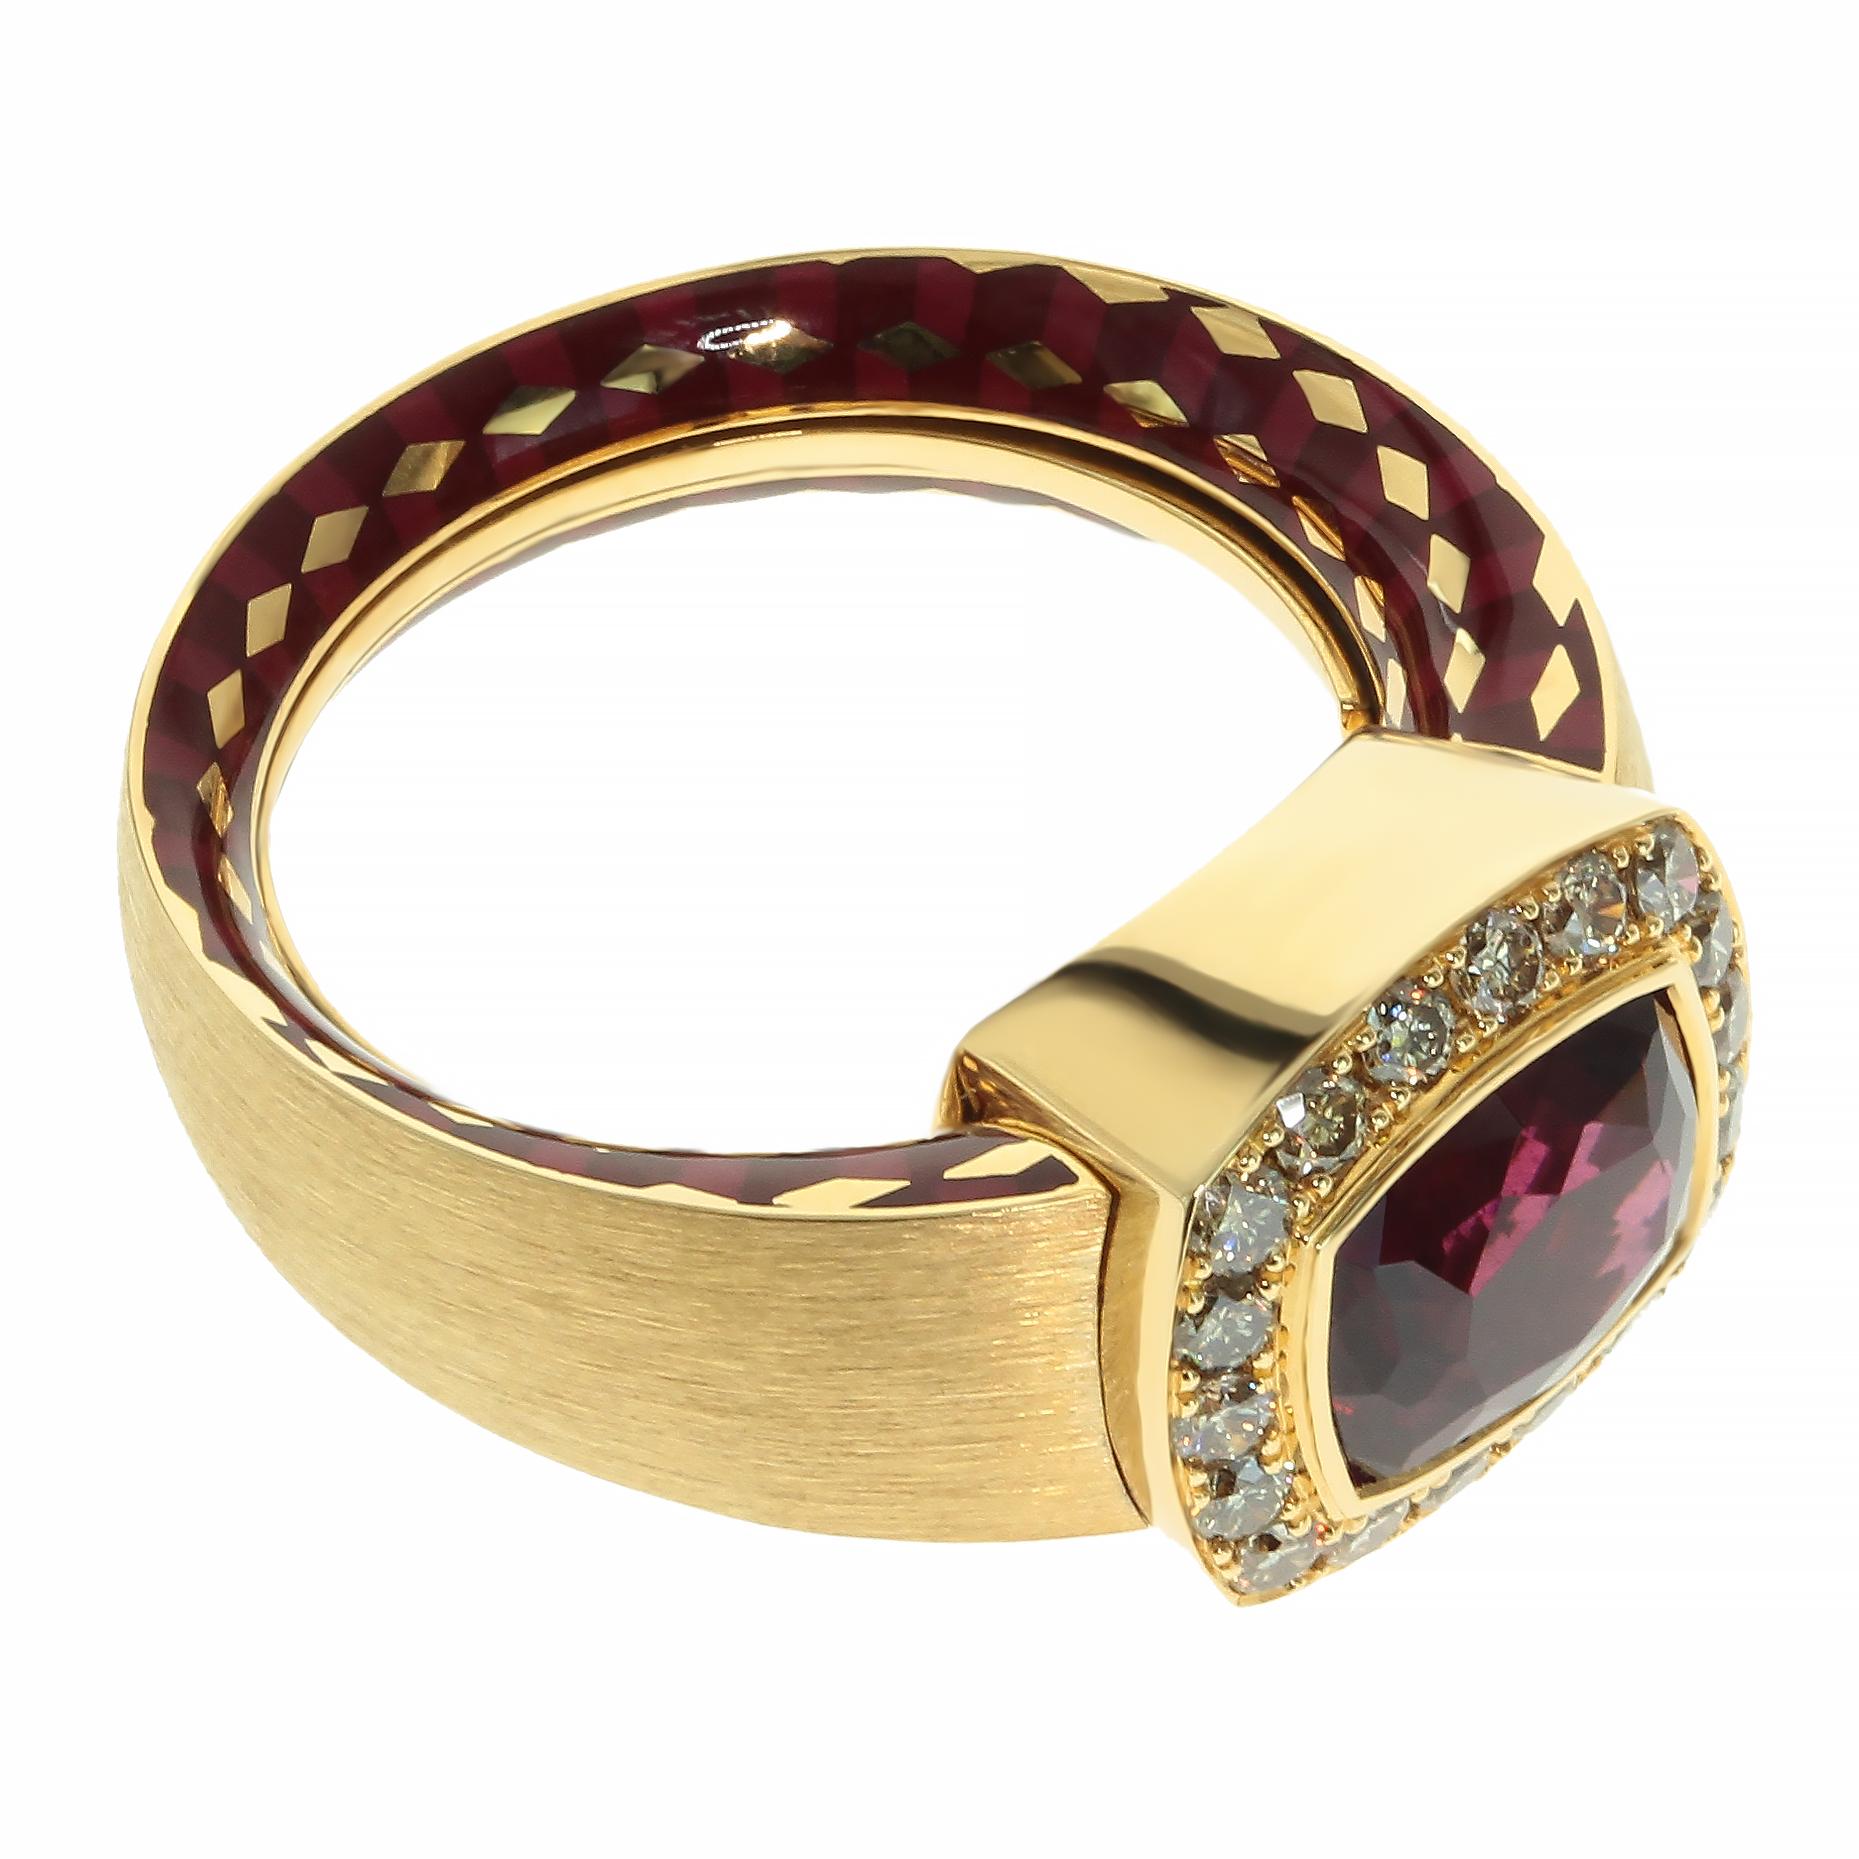 Rhodolite Garnet Diamonds 18 Karat Yellow Gold Male Enamel Ring
Our worldwide famous Kaleidoscope collection. Male version out now.
For Men who tired of boring ordinary things. Be different. Be brighter than others.
Accompanied with the Cufflinks